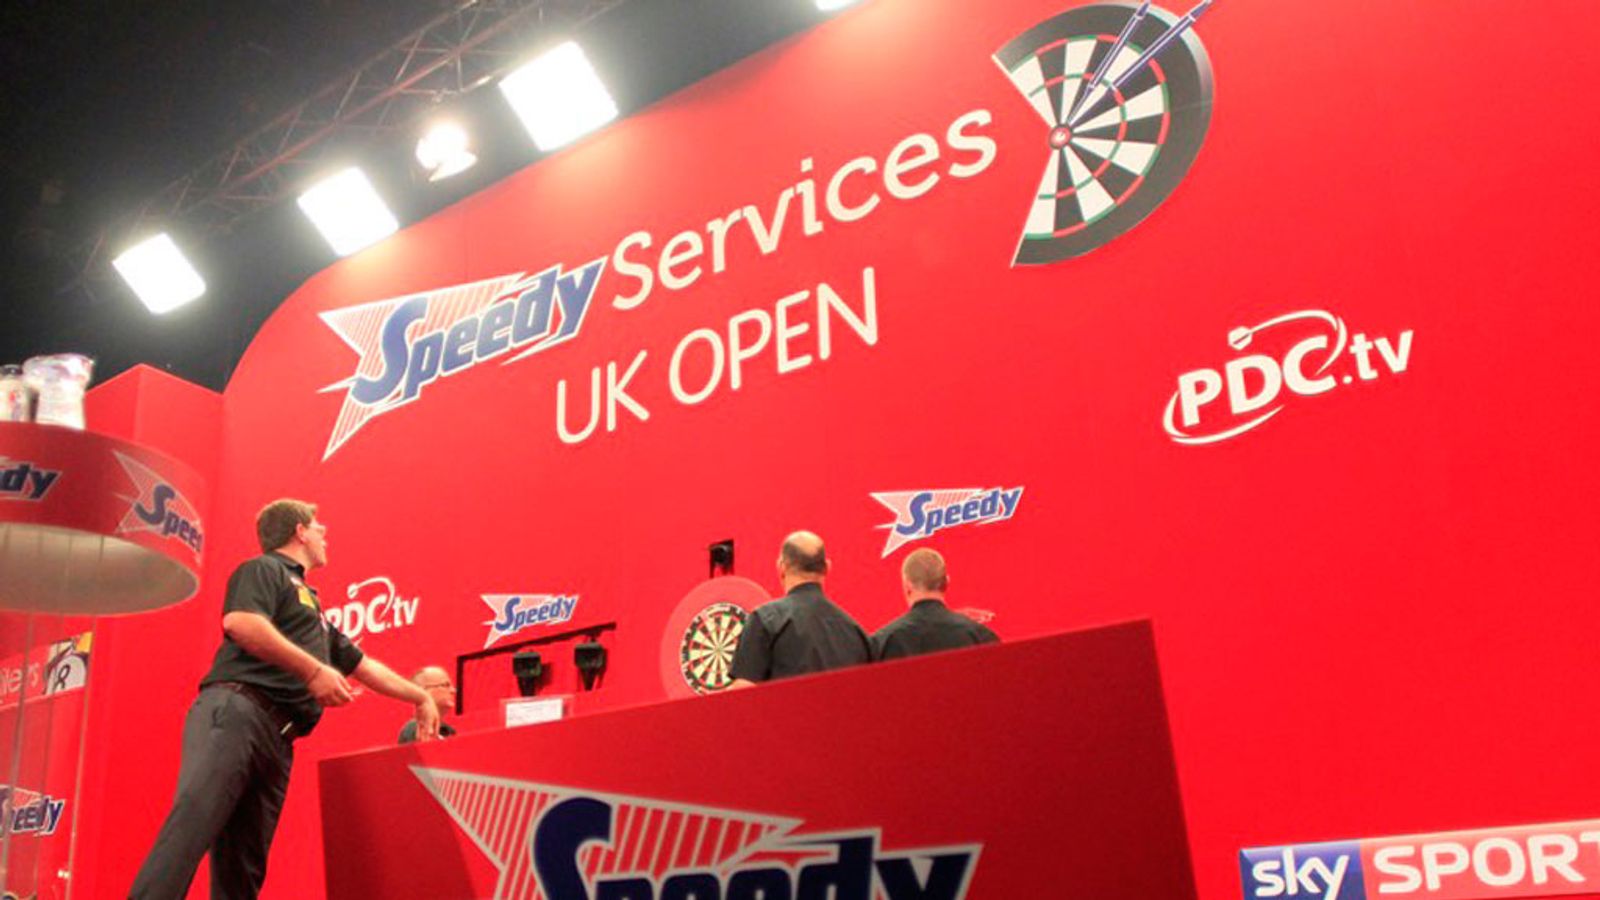 PDC UK Open Former champions Phil Taylor and James Wade in action on